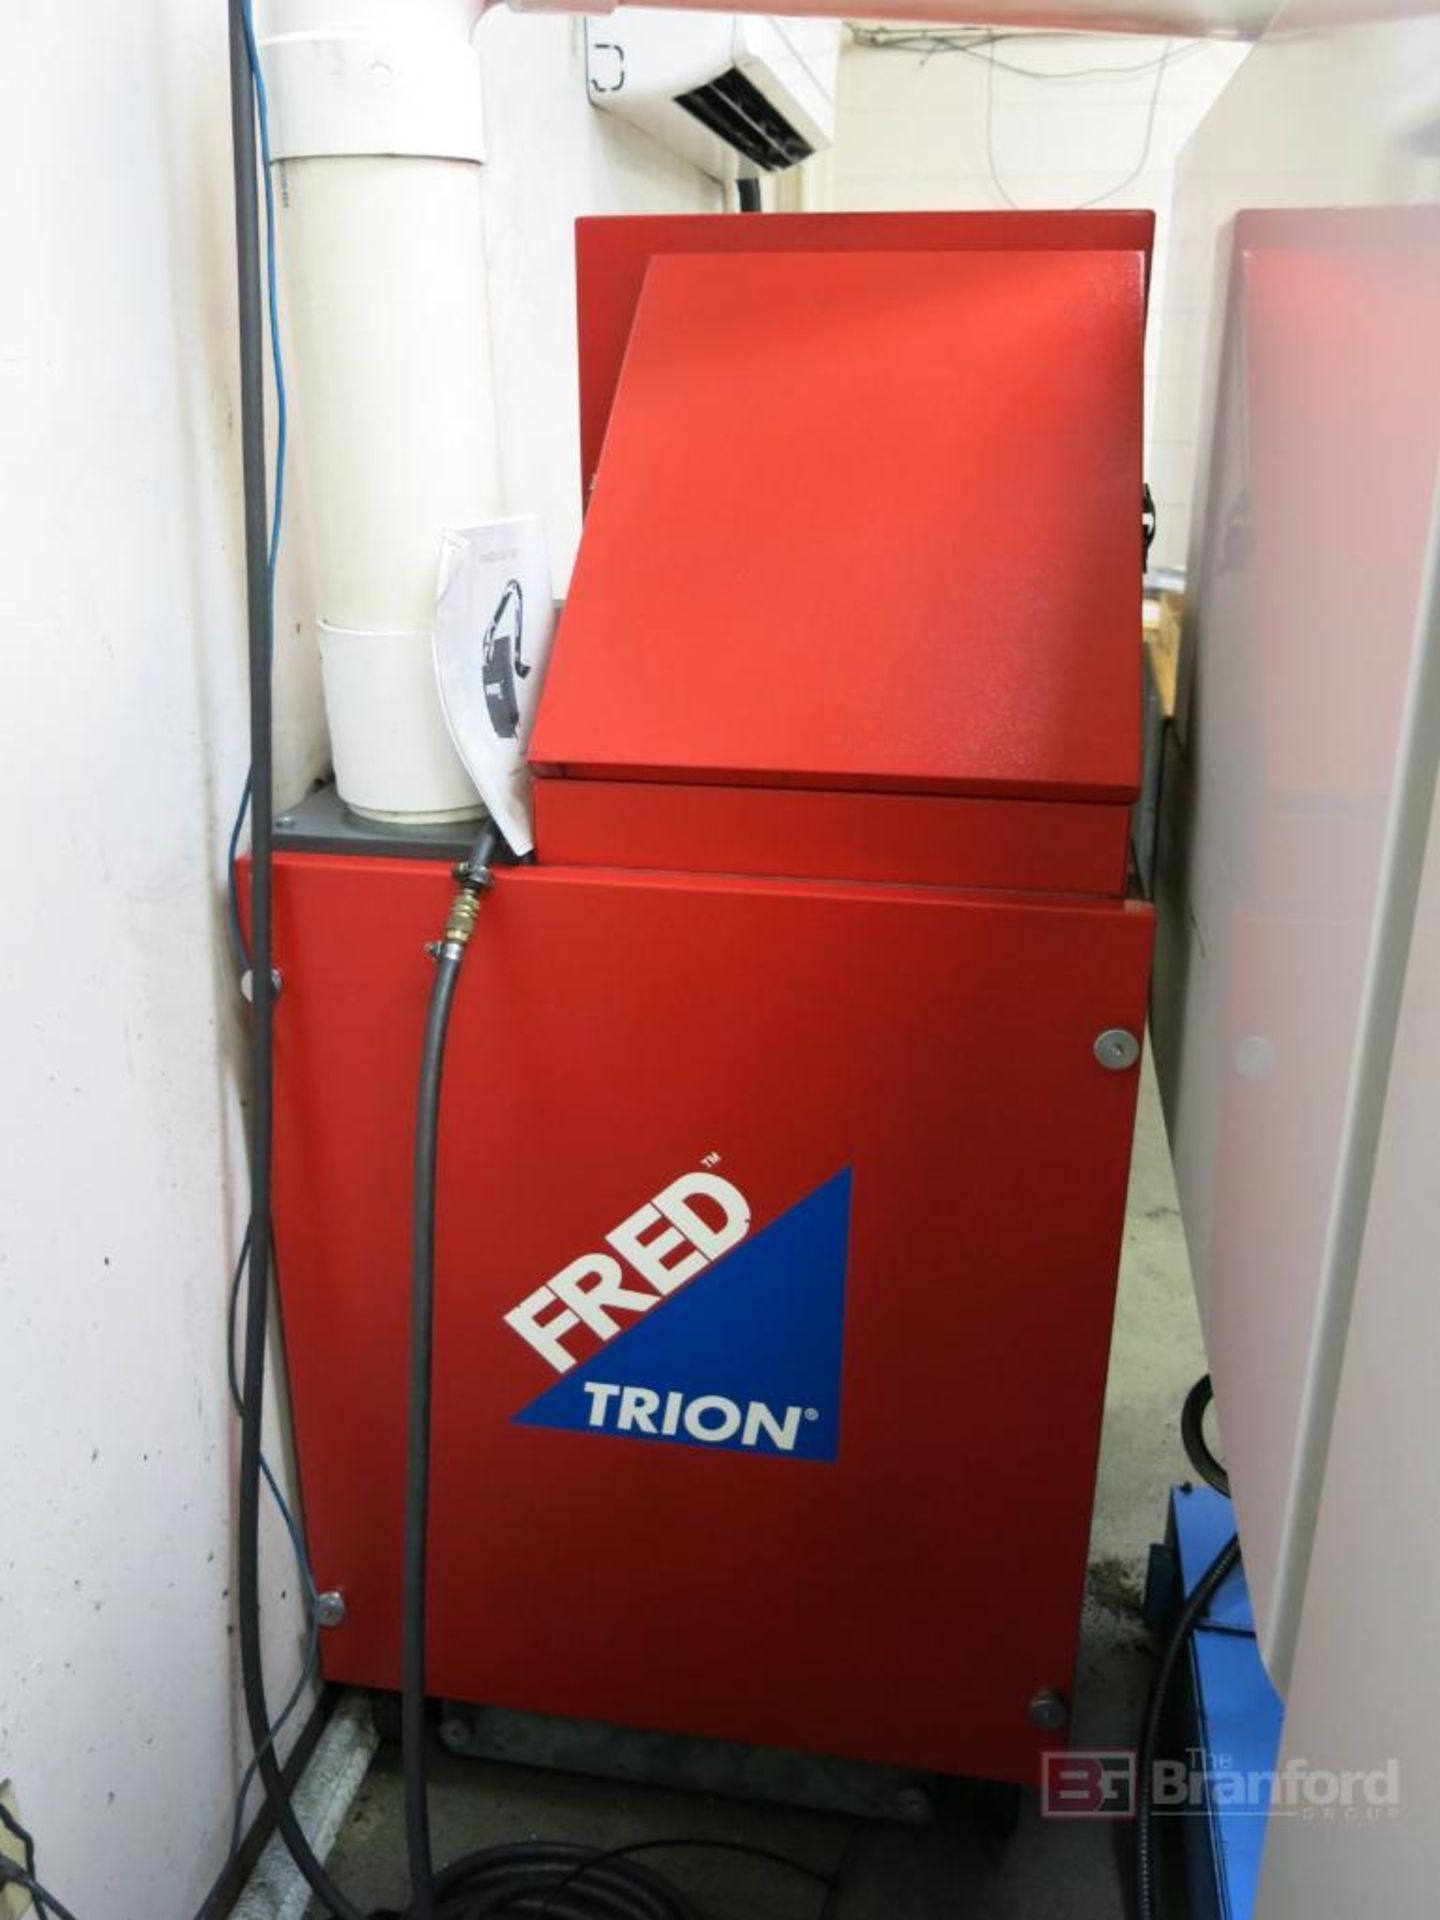 Frev Trion Media Air Cleaner Model FRED-ICS 1.5 SUE 1.5-HP - Image 2 of 3